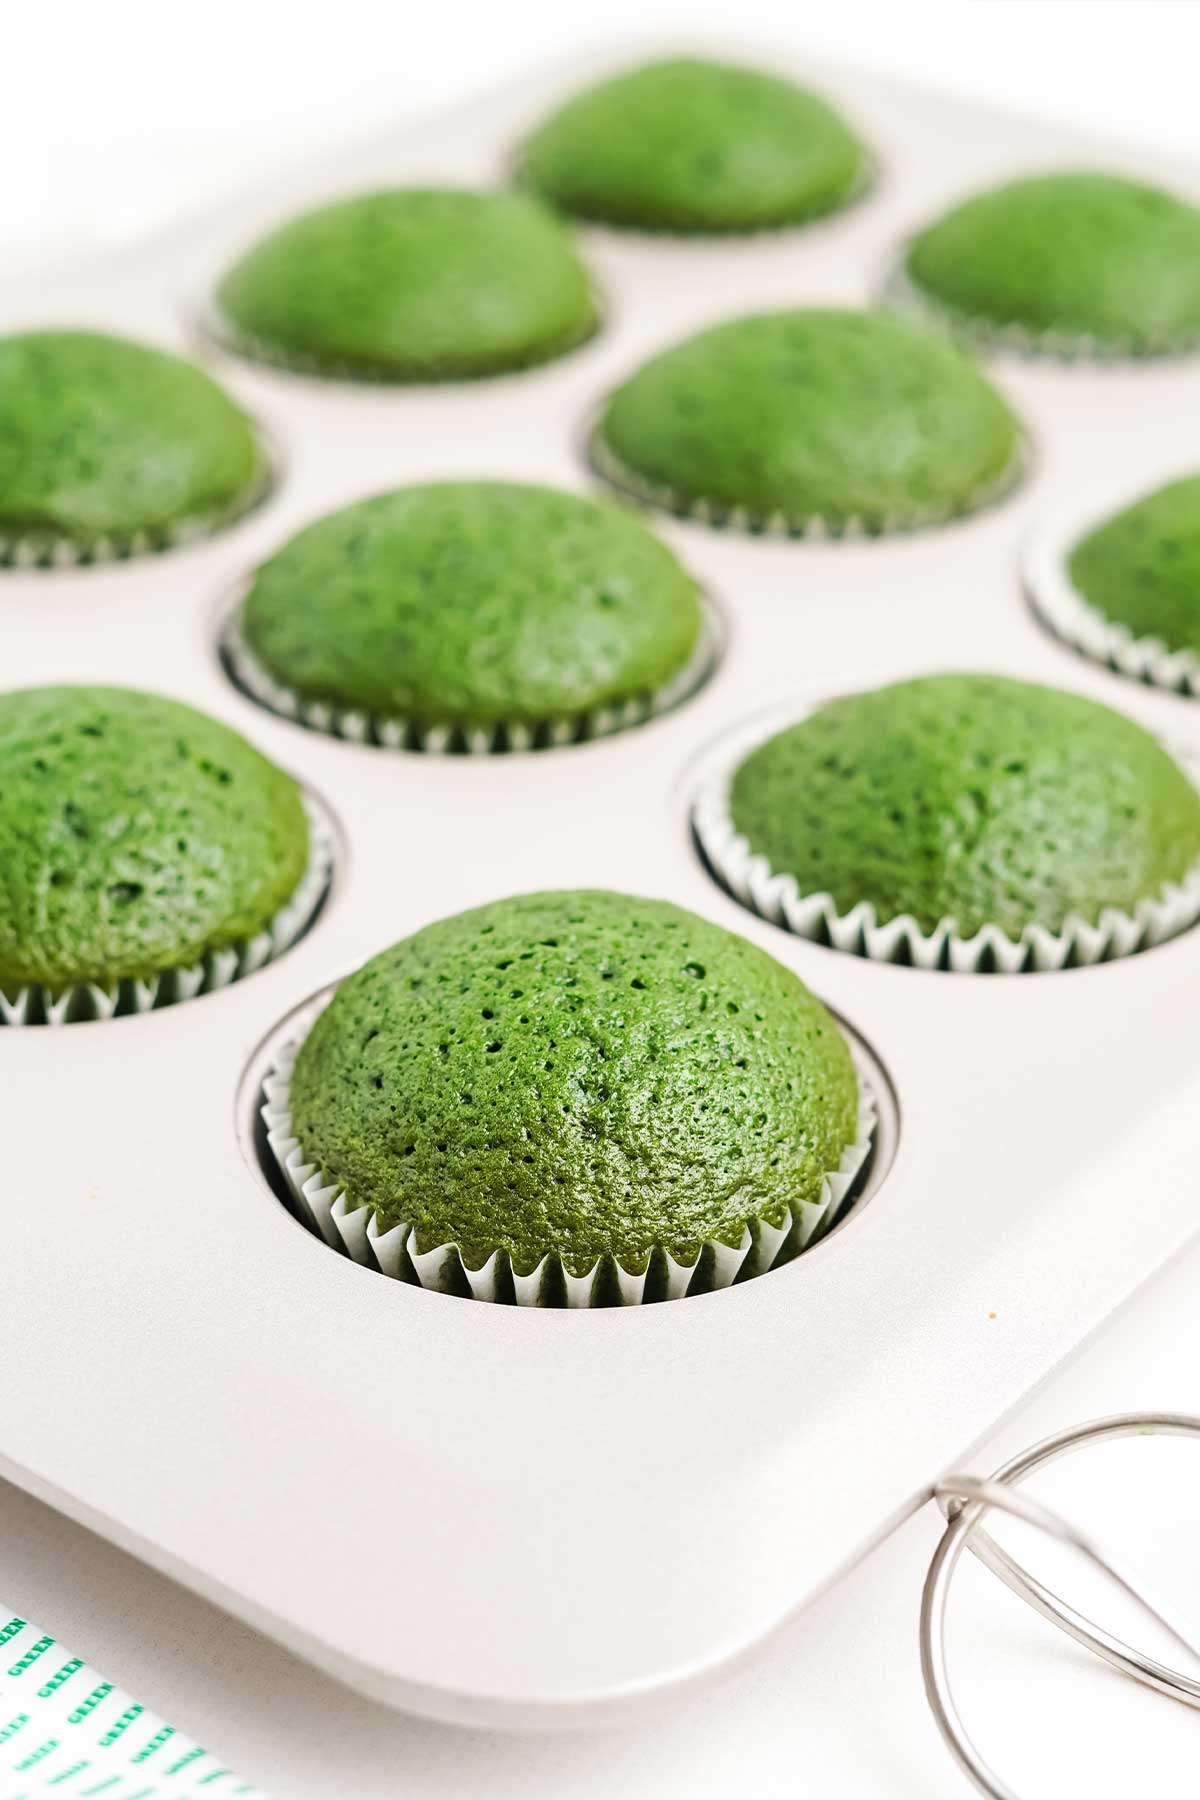 Baked St Patrick's Day cupcakes.